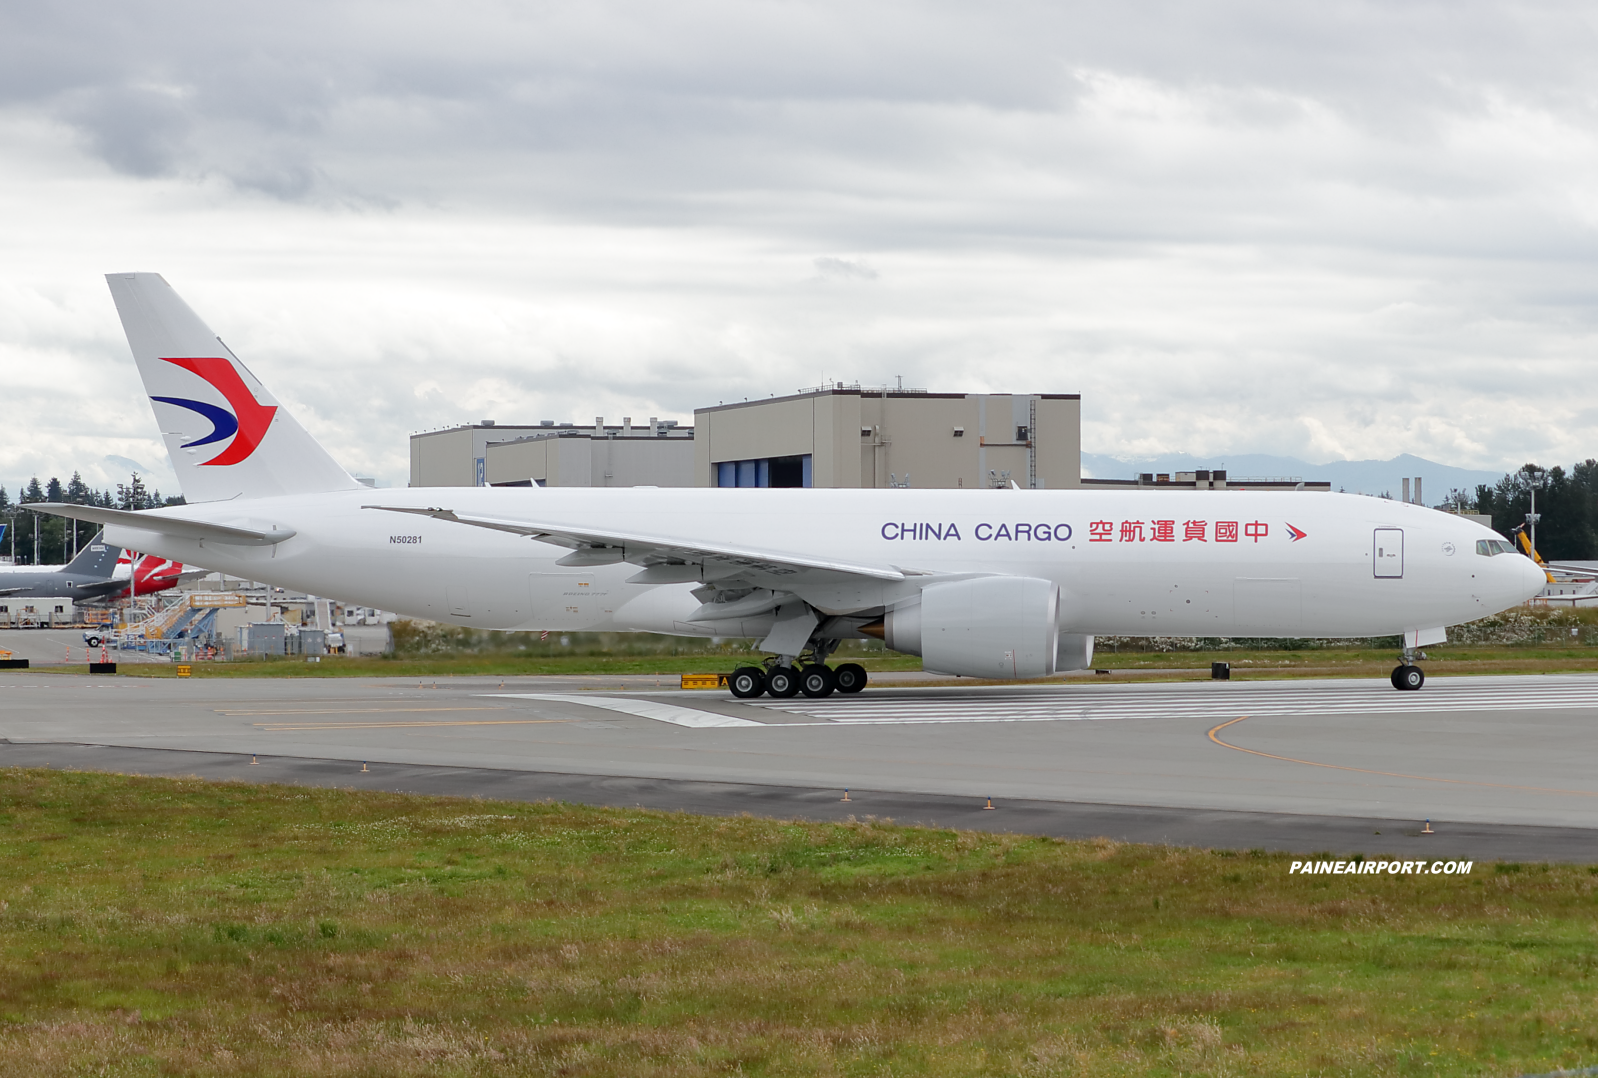  China Cargo 777F line 1657 at KPAE Paine Field 